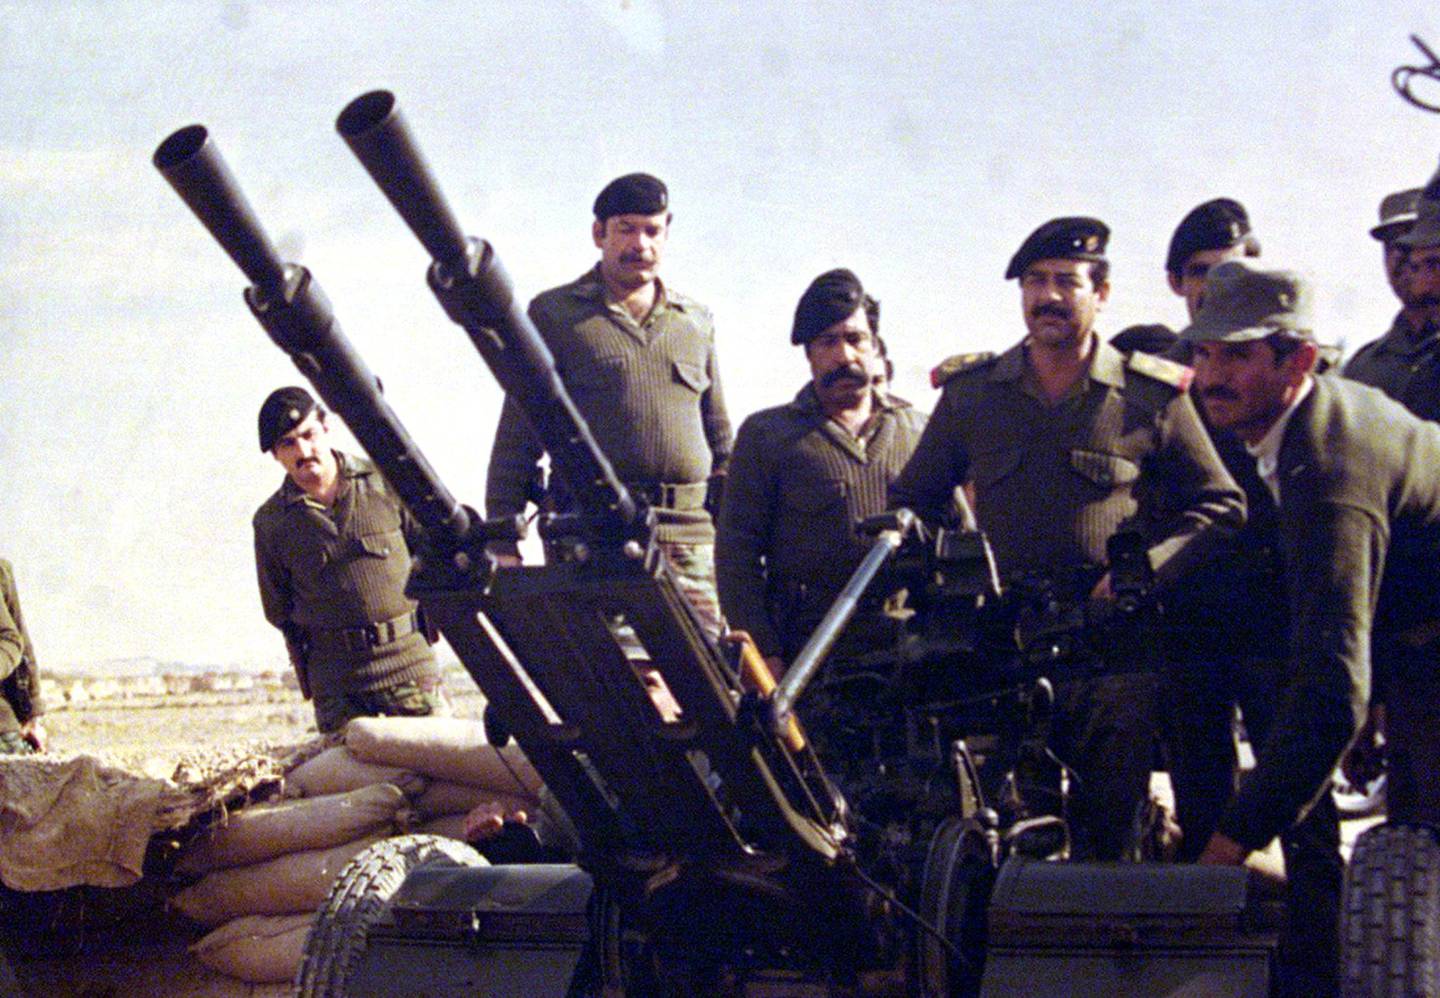 (FILES)--In this photograph made available by the official Iraqi presidential photographer 26 April 2002, Iraqi President Saddam Hussein is seen at the Iraq-Iran border during Iraq-Iran war 1980-1988. Saddam will celebrate his 65th birthday on 28 April. He was born in 1937 in Takrit, in the province of Salahedin, 170 kms north of Baghdad. AFP PHOTO/HO (Photo by PRESIDENTIAL PALACE / AFP)